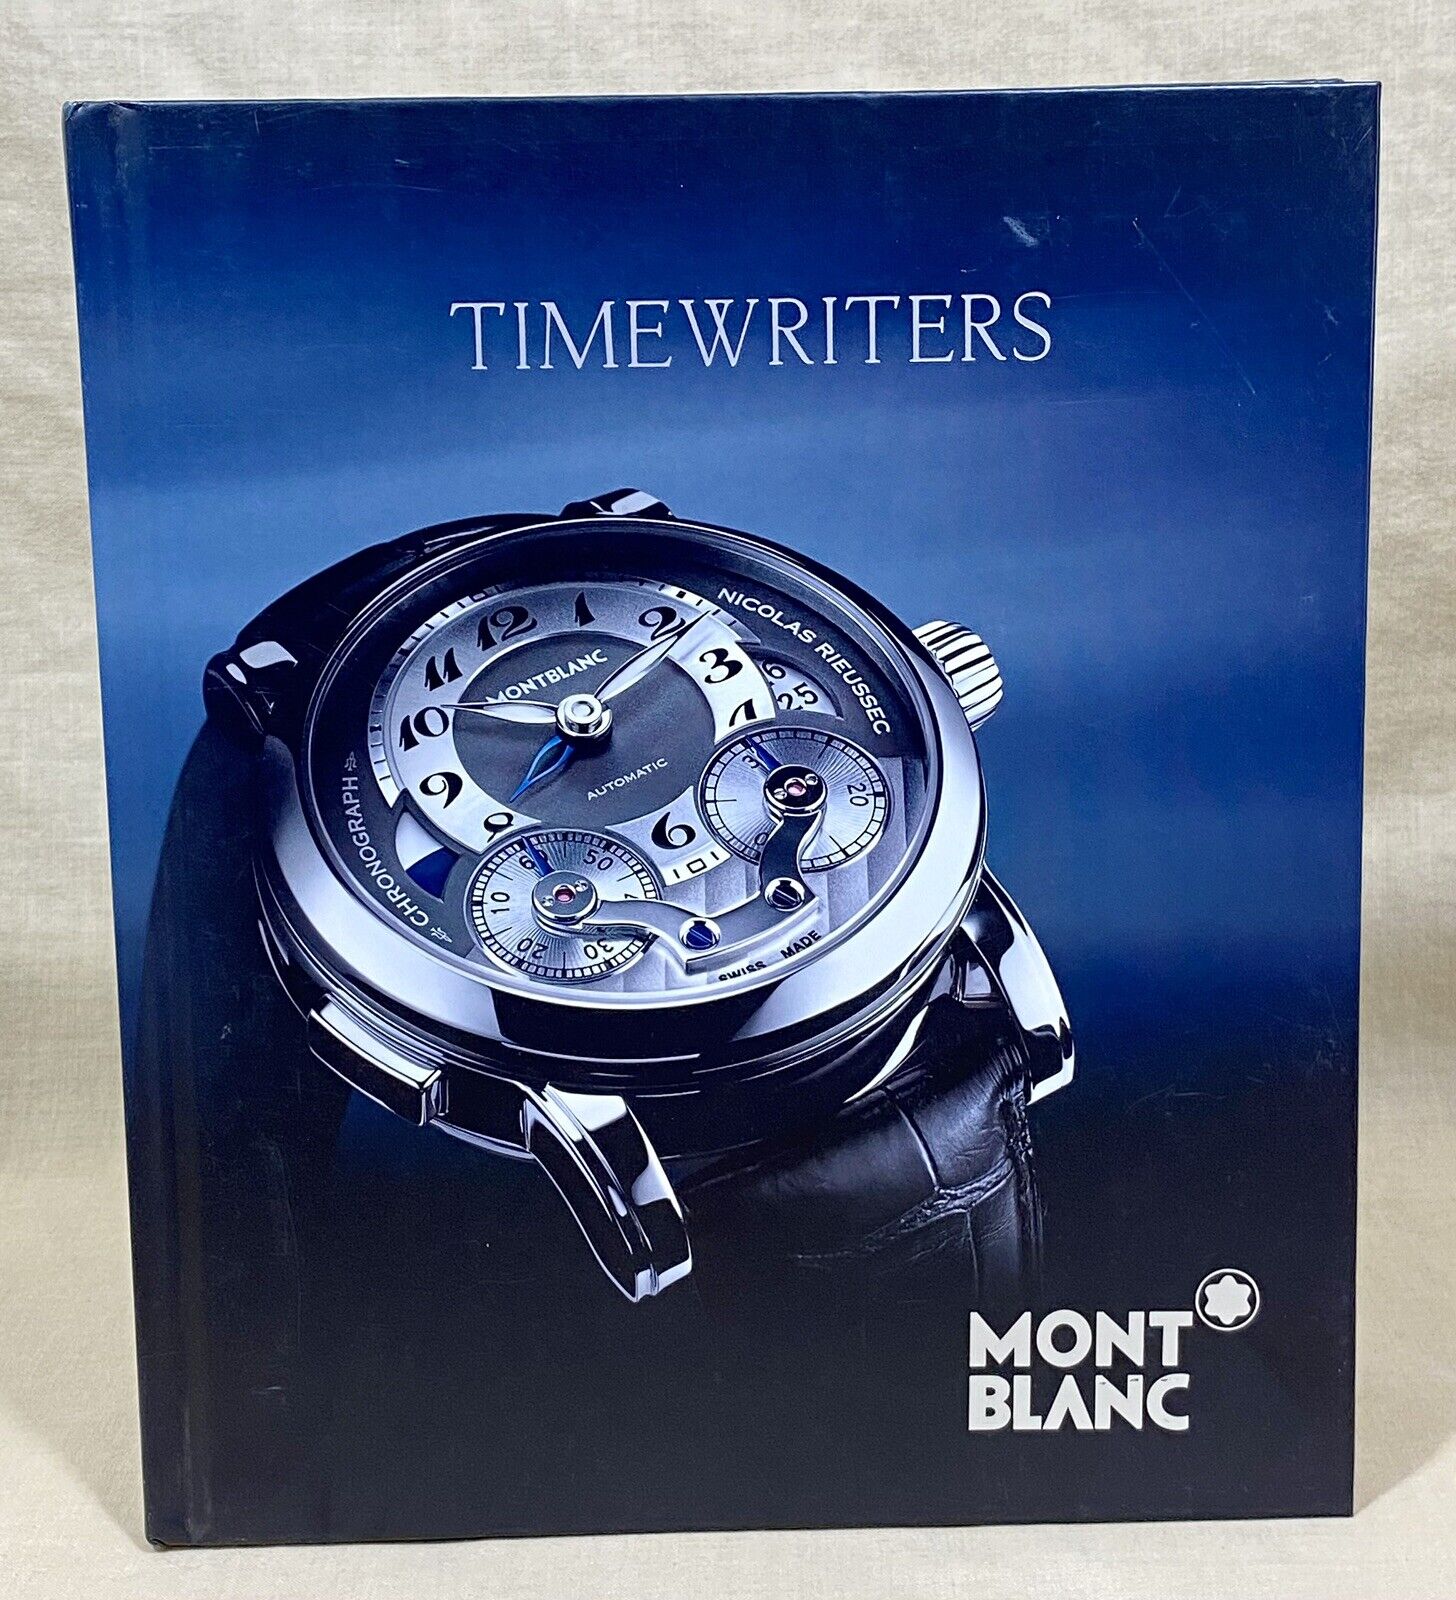 MONTBLANC 2010 Timewriters Catalogue Book French Star Profile Sport Collection /